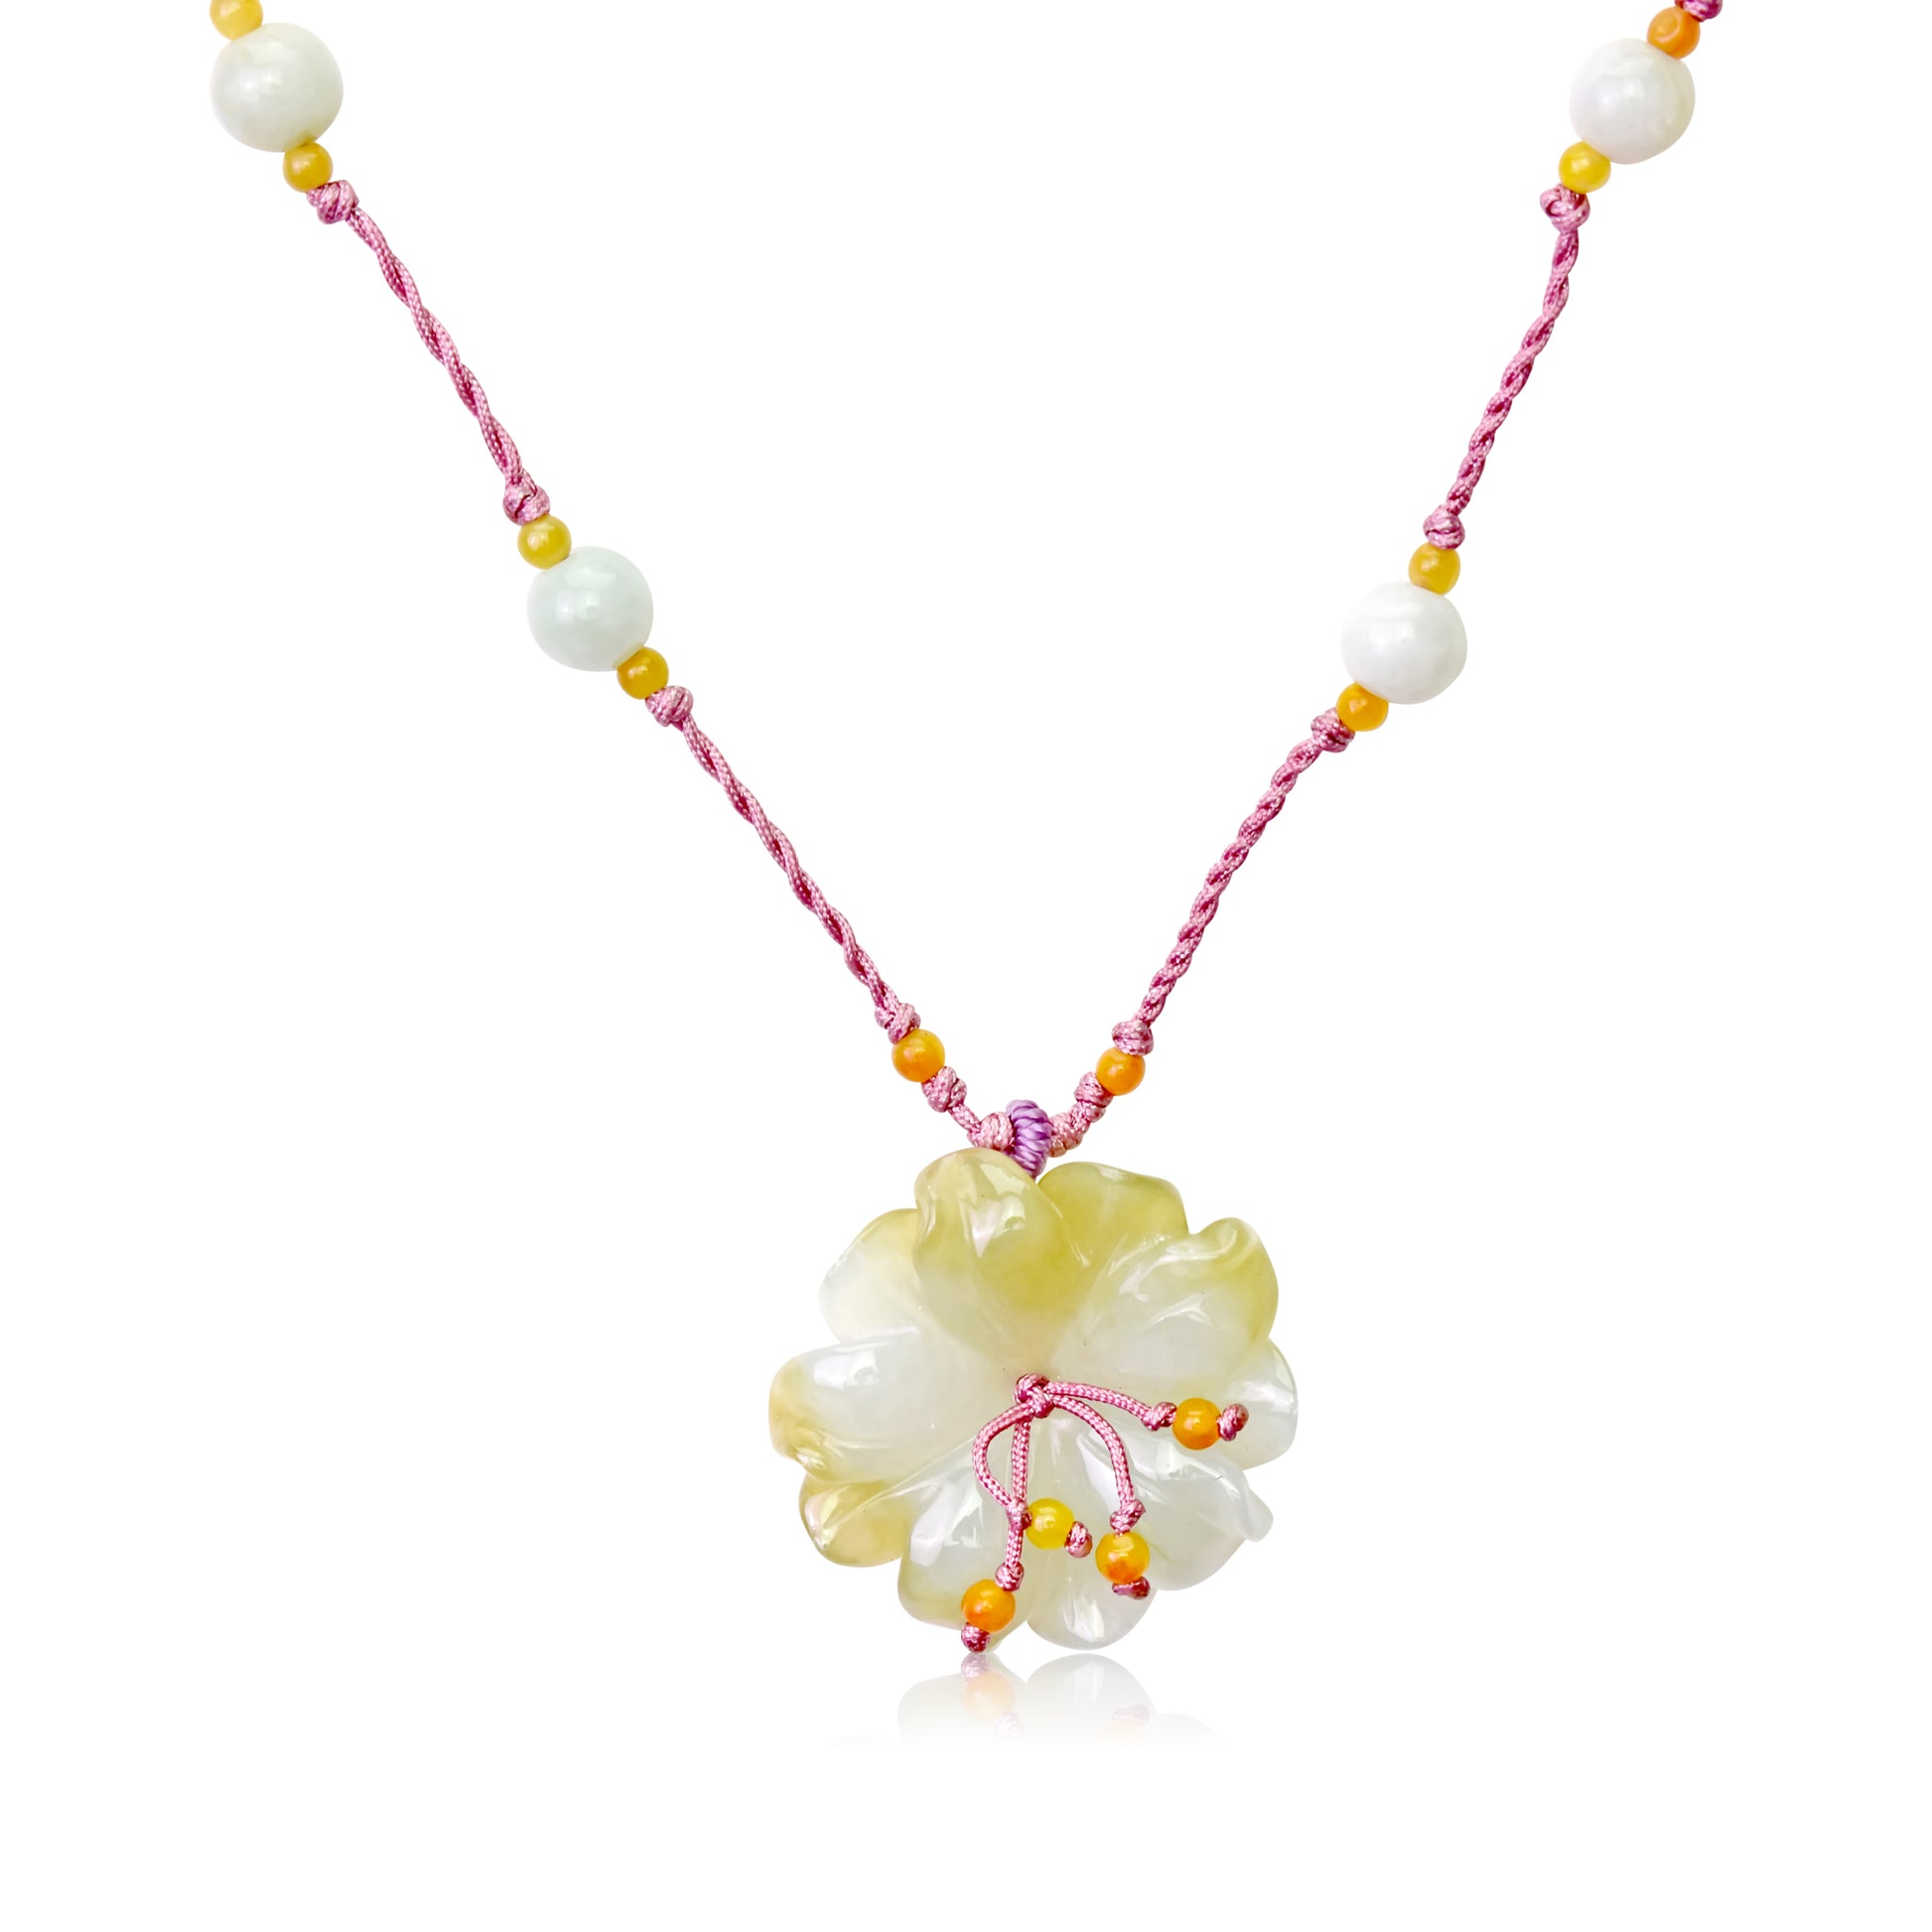 Unlock Your Inner Healing with Anemone Flower Necklace